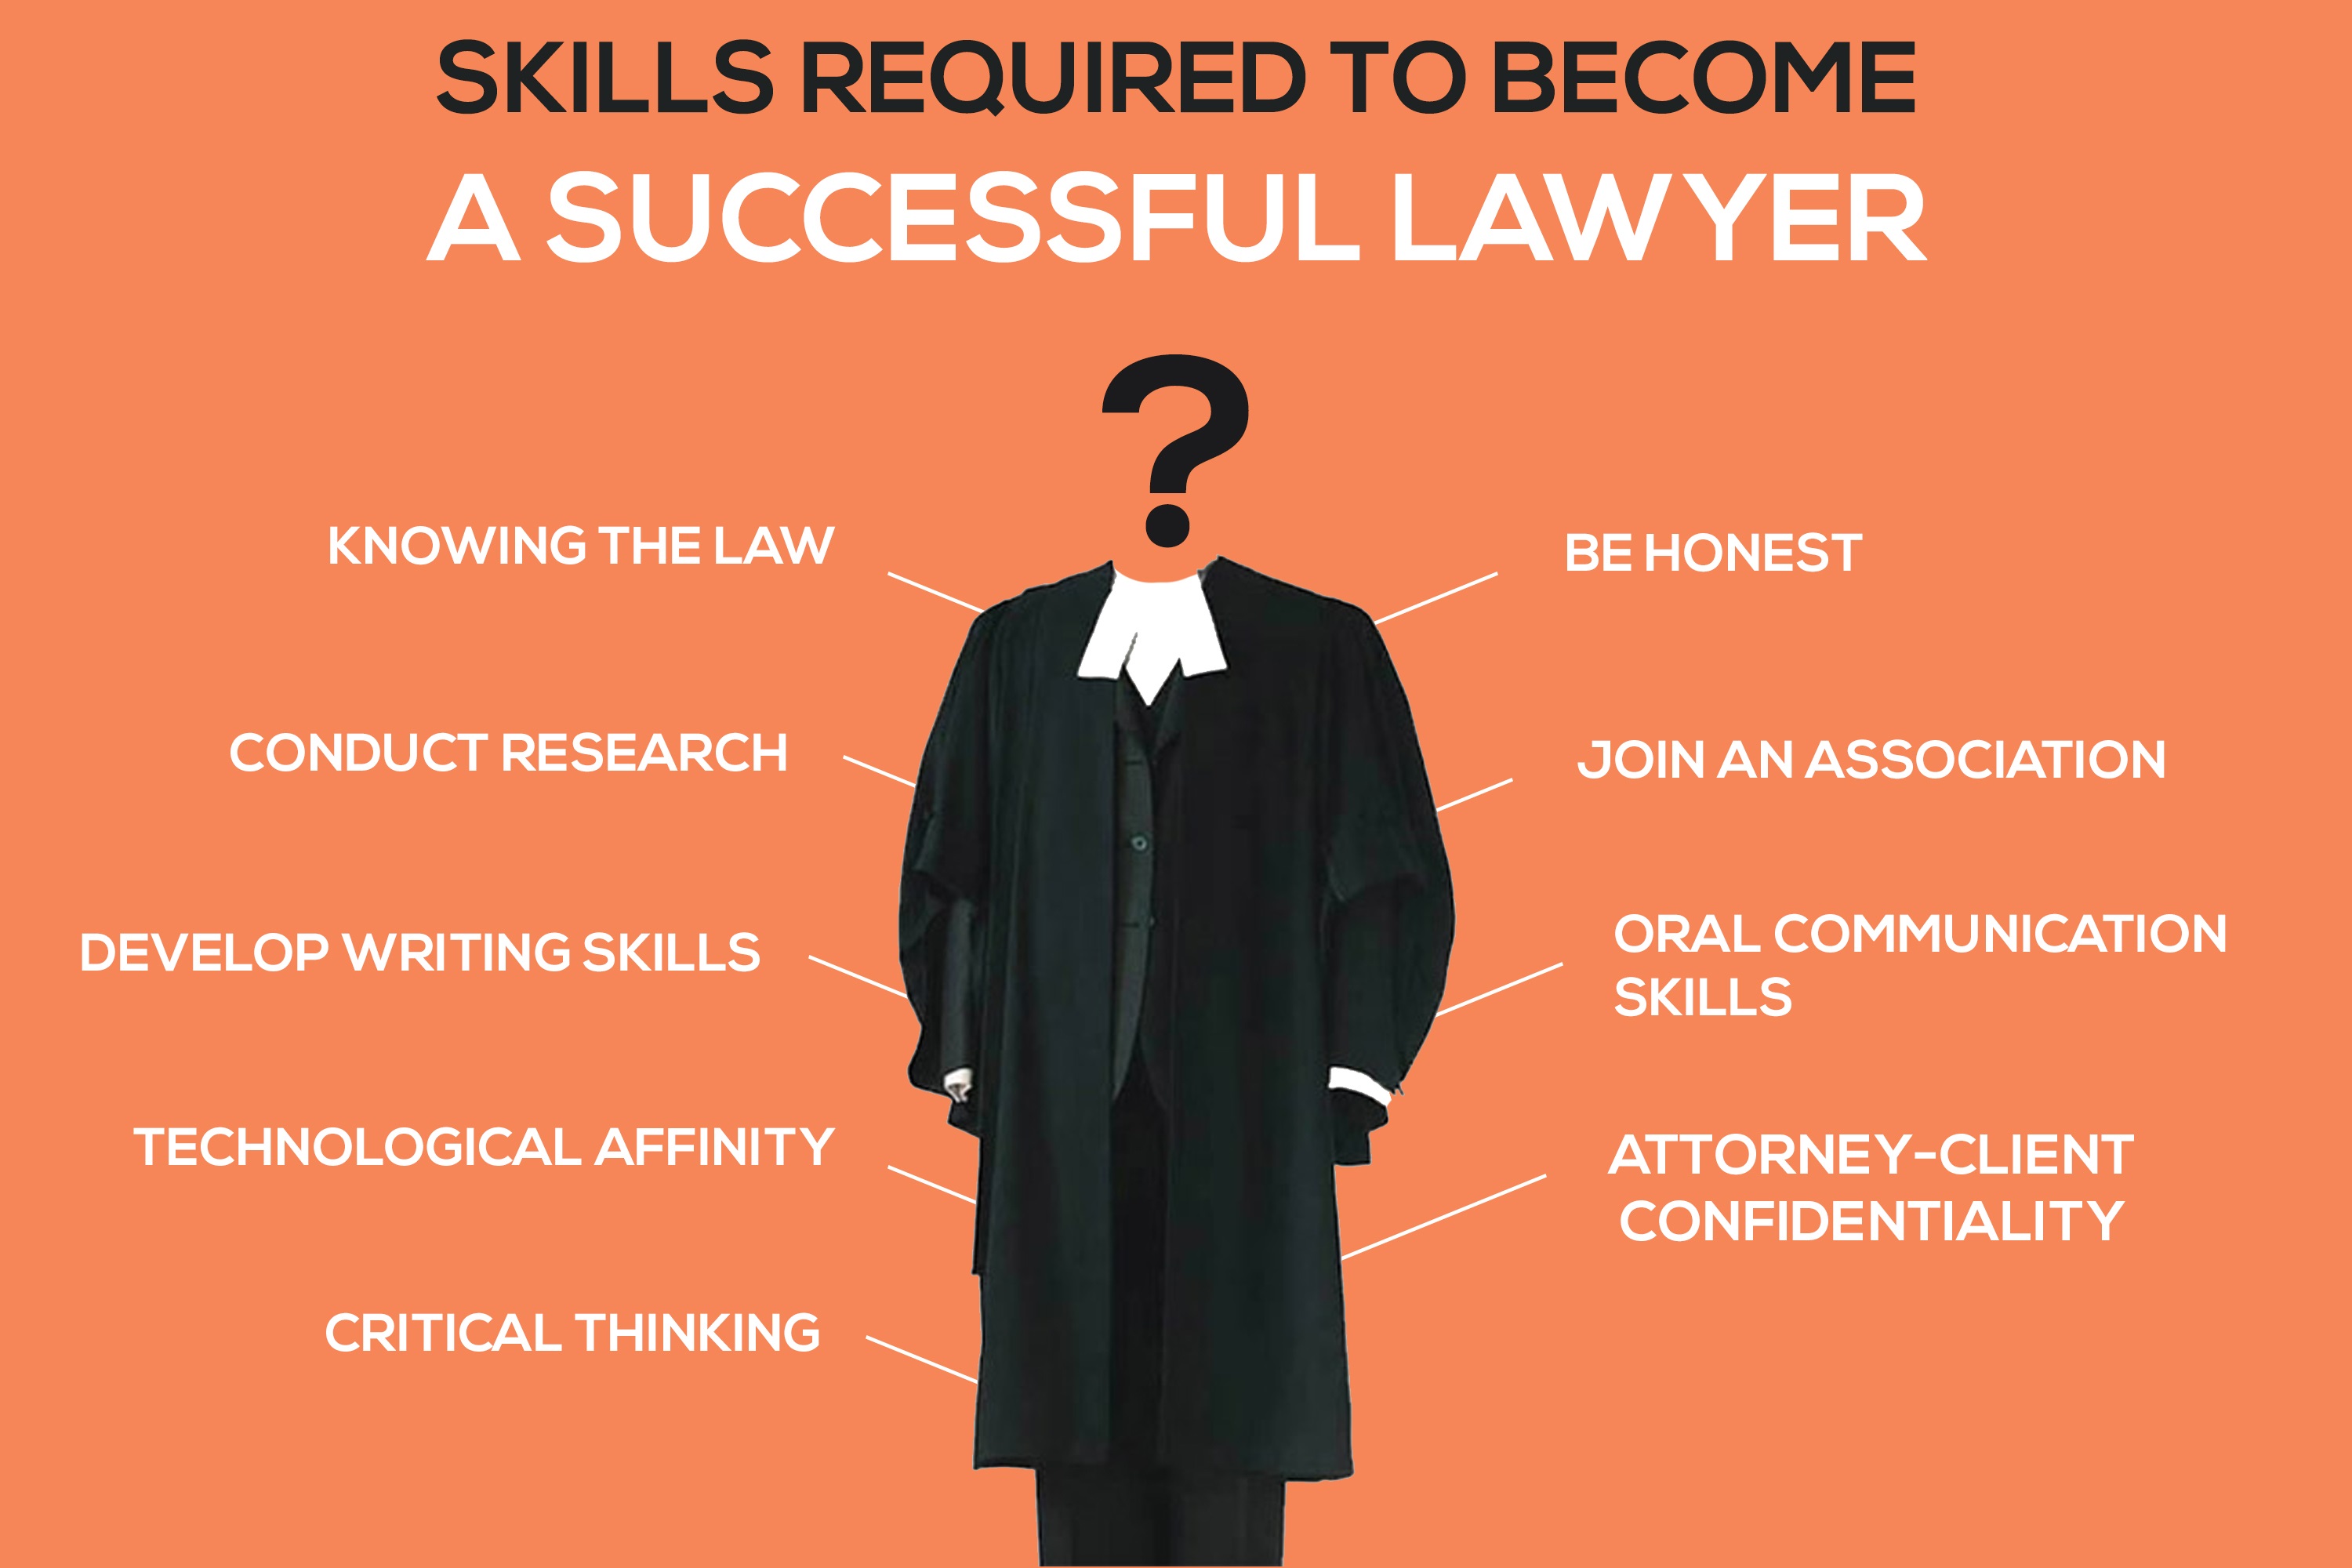 What are the essential skills required to be a successful lawyer?